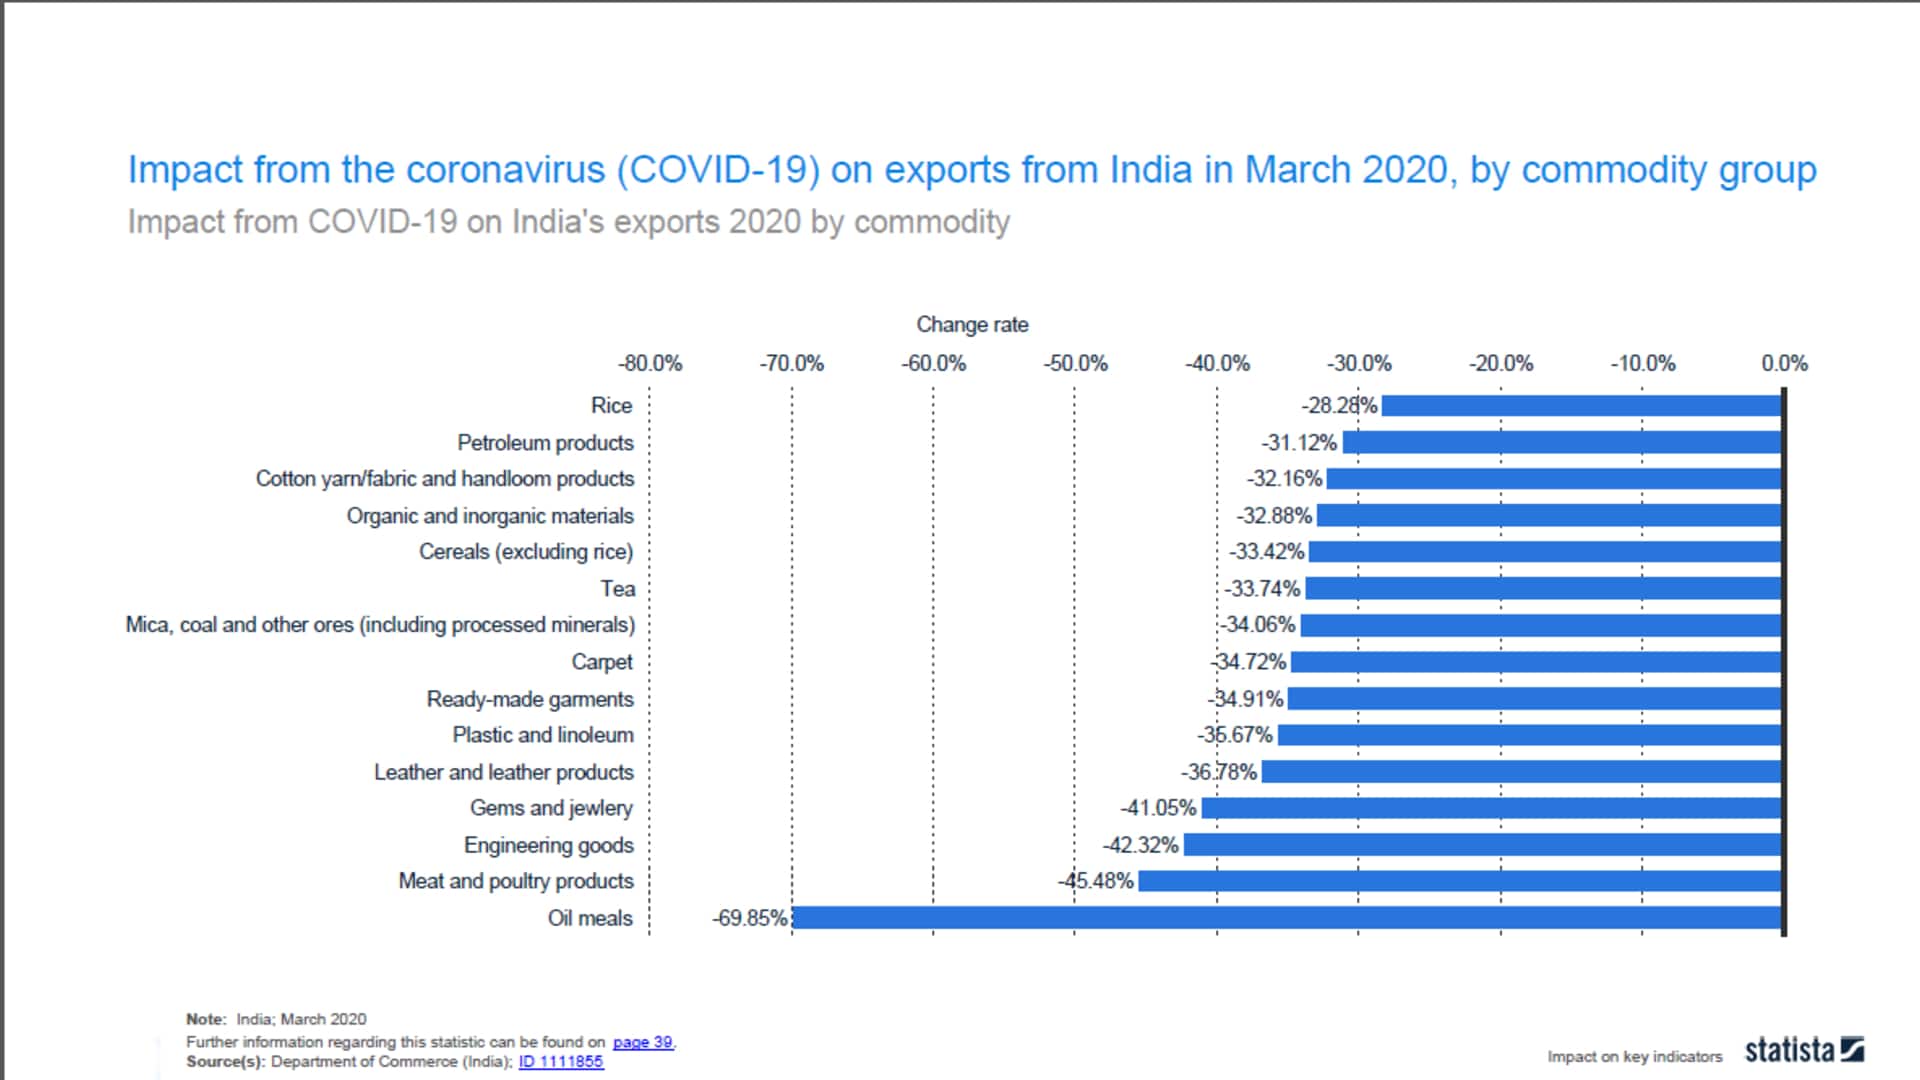 https://images.moneycontrol.com/static-mcnews/2020/05/3.-Impact-from-the-coronavirus-COVID-19-on-exports-from-India-in-March-2020-by-commodity-group.jpg